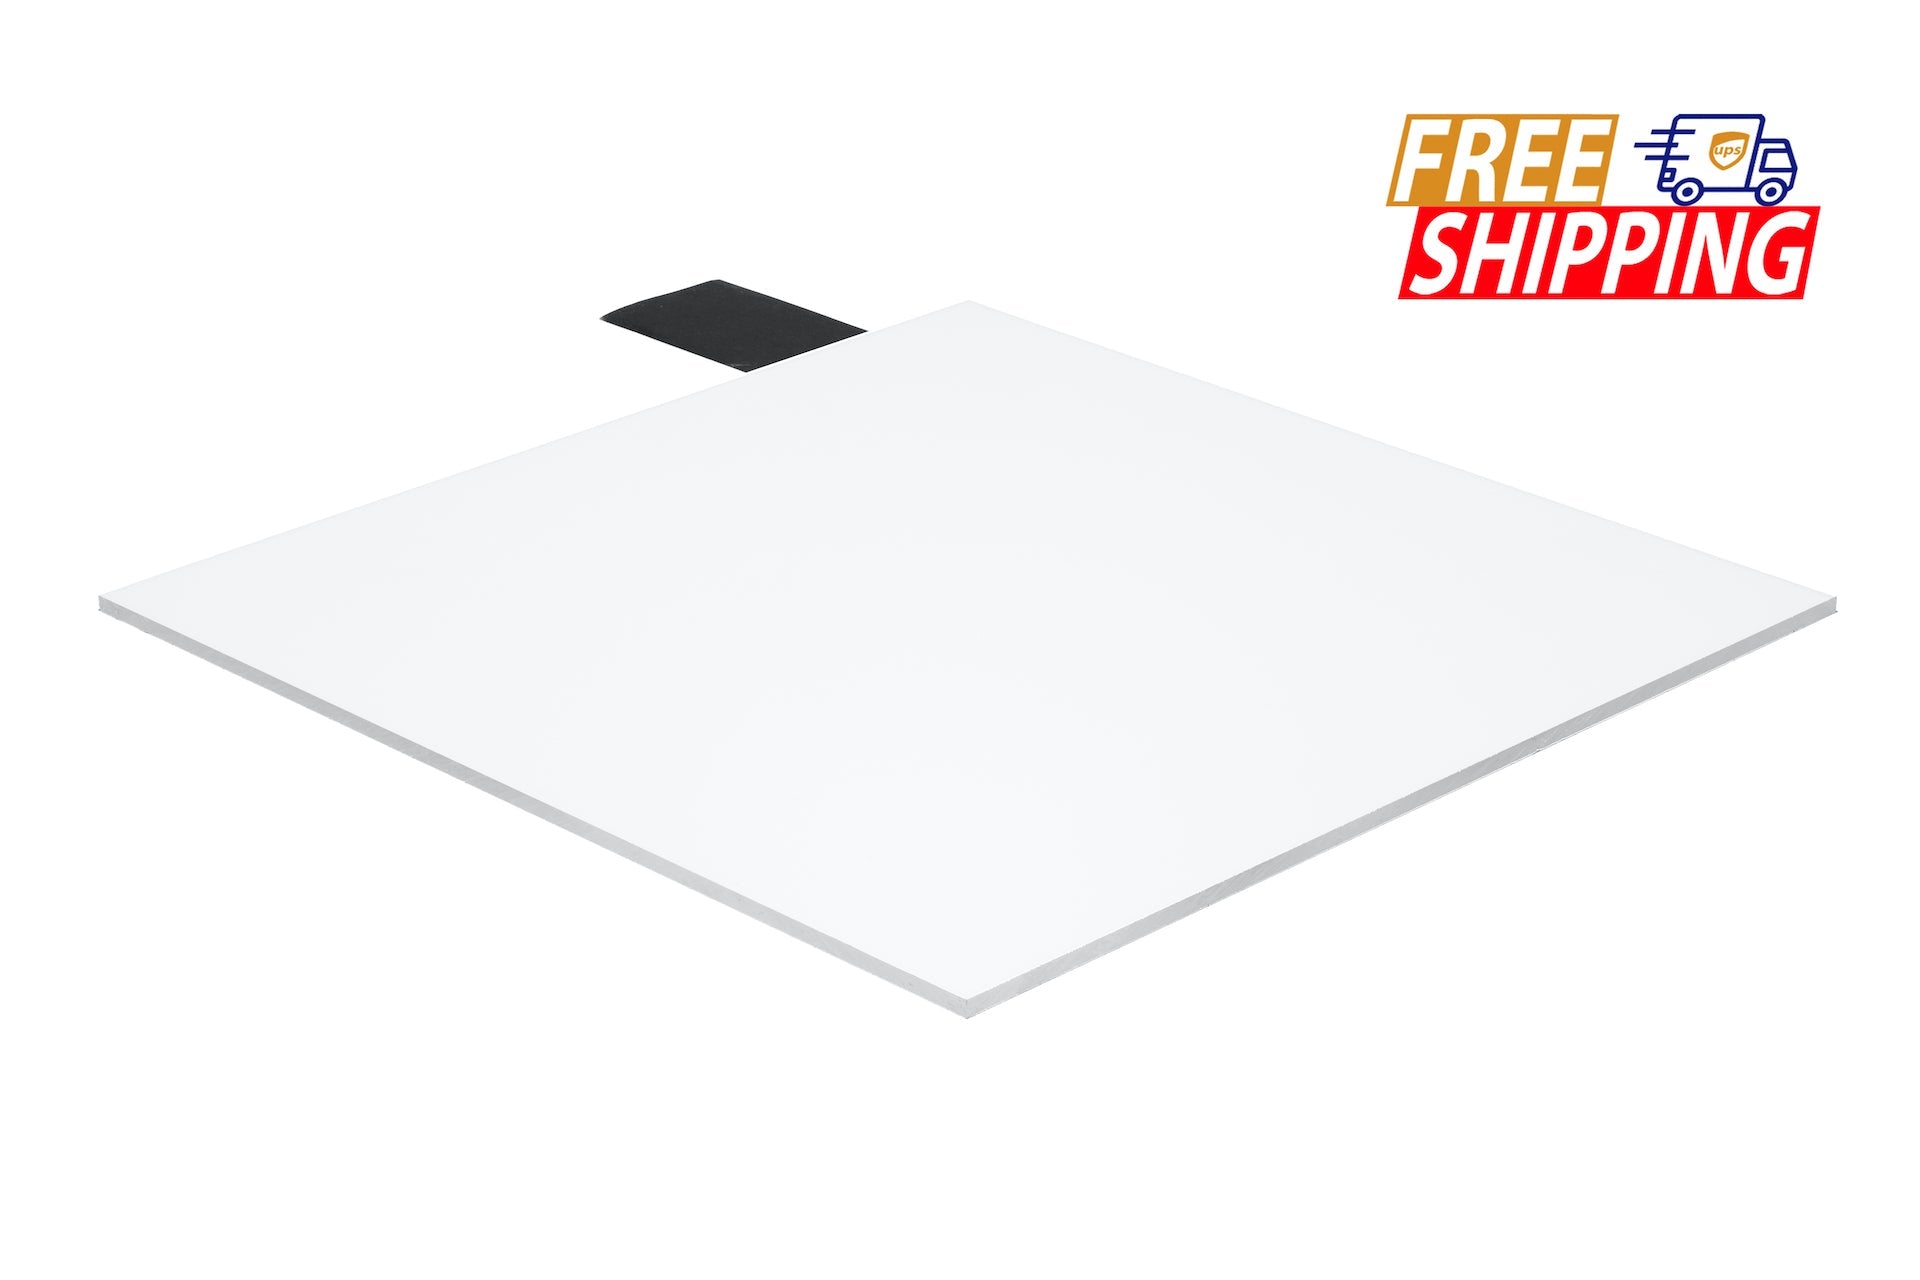 Whole Acrylic Sheet - White Opaque - 1/8 inch thick